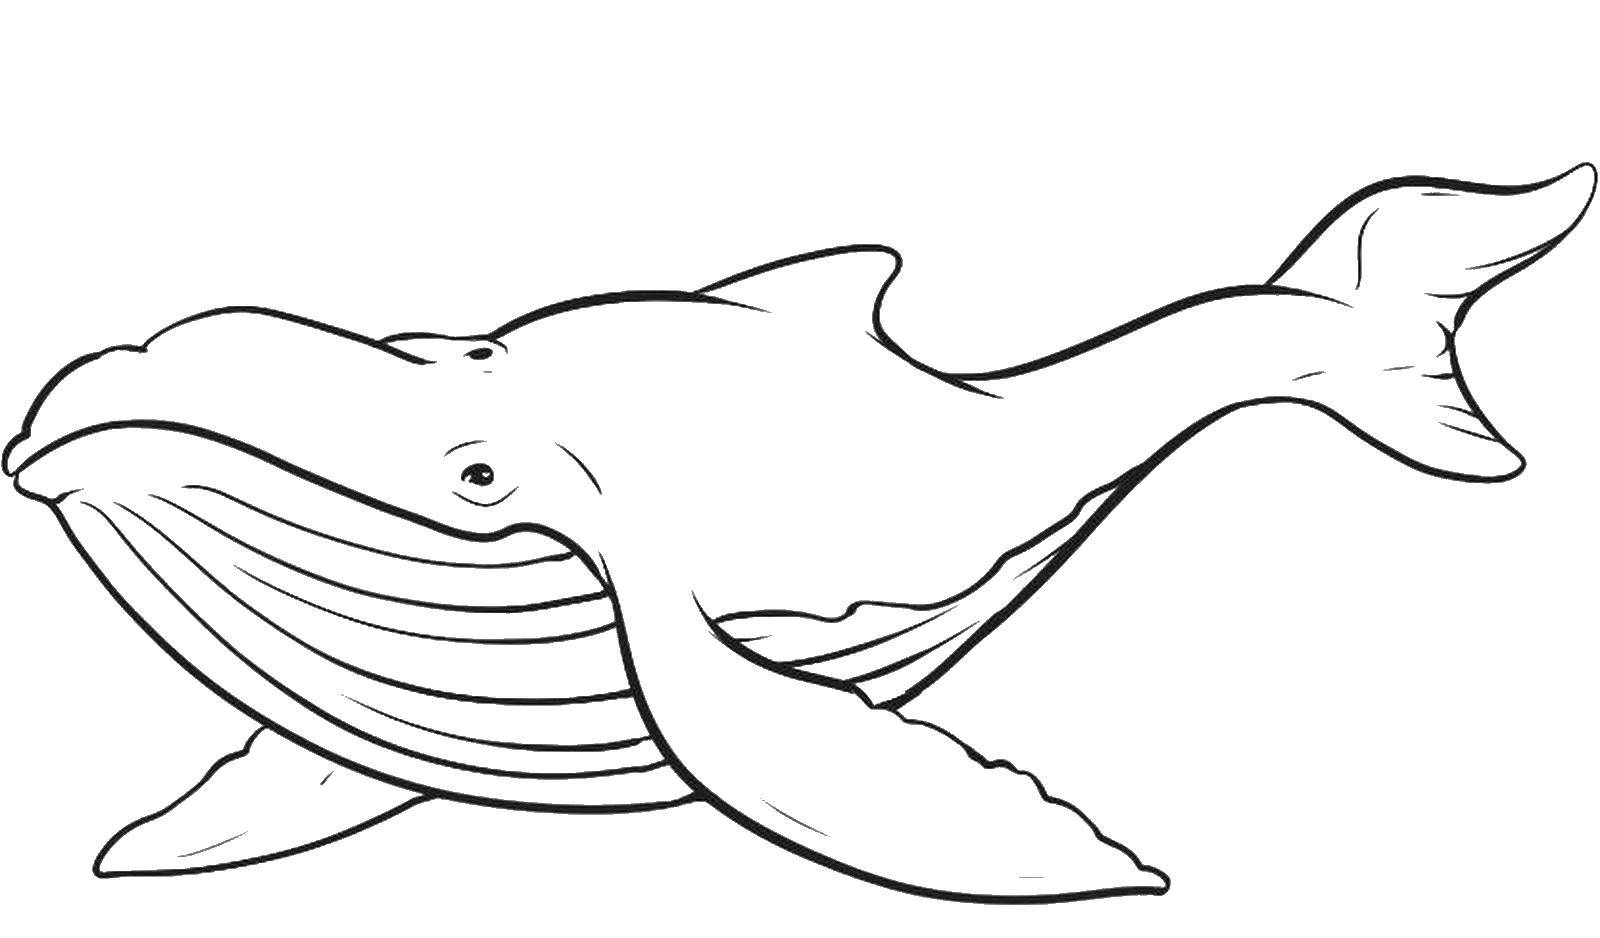 Coloring Whale. Category marine animals. Tags:  whale, tail.